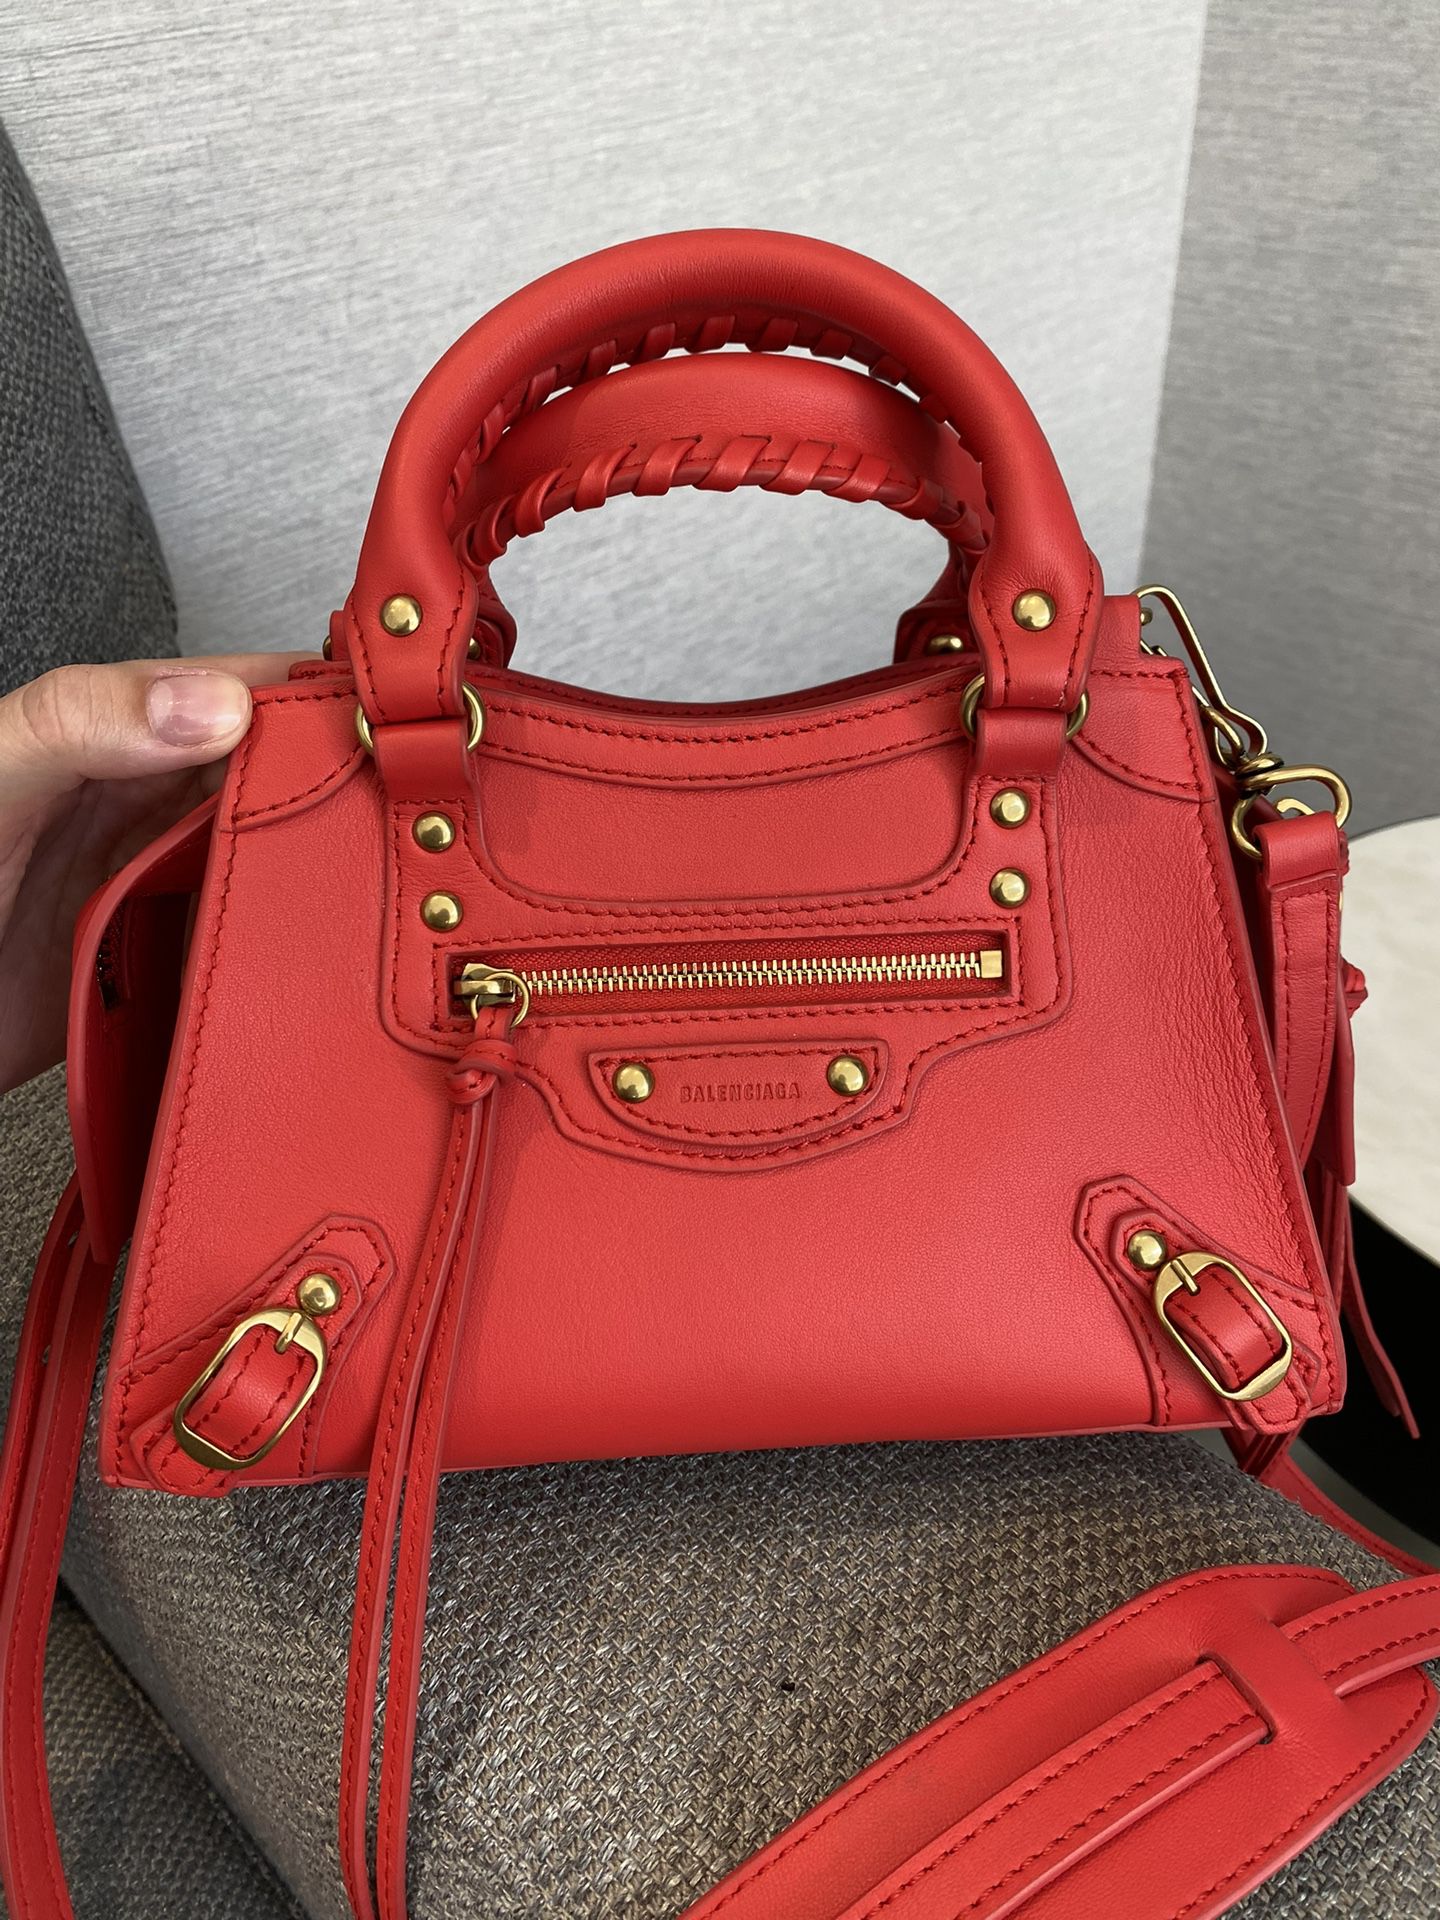 Neo classic city Balenciaga bag in Red leather for Sale in New York, NY OfferUp